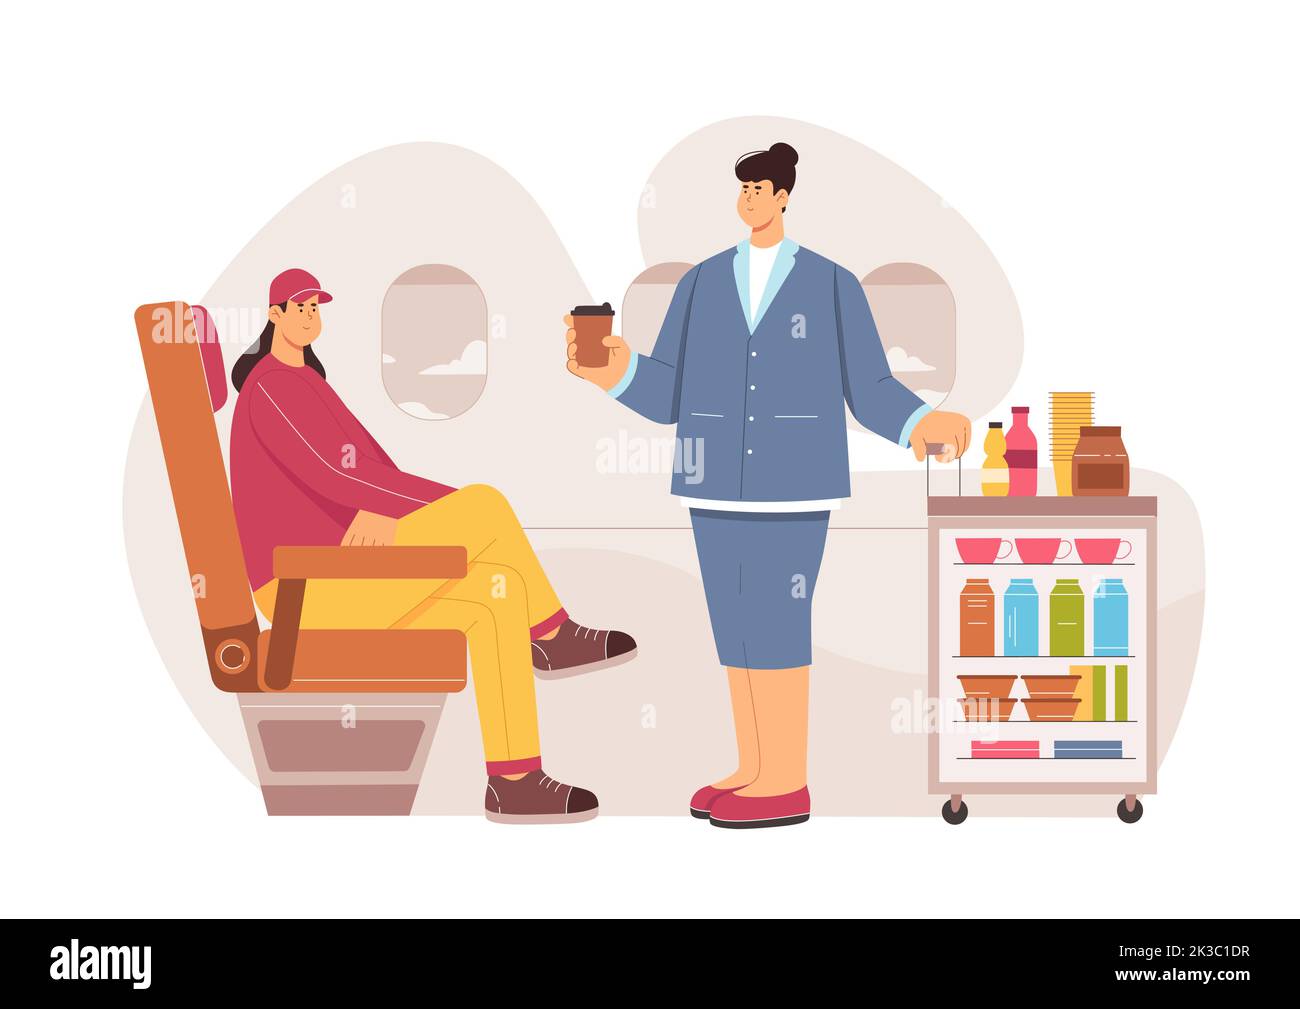 Hospitality service in airplane vector illustration. Cartoon stewardess holding coffee and handle of trolley, woman serving food and drink to passenger, man sitting in comfortable seat by window Stock Vector